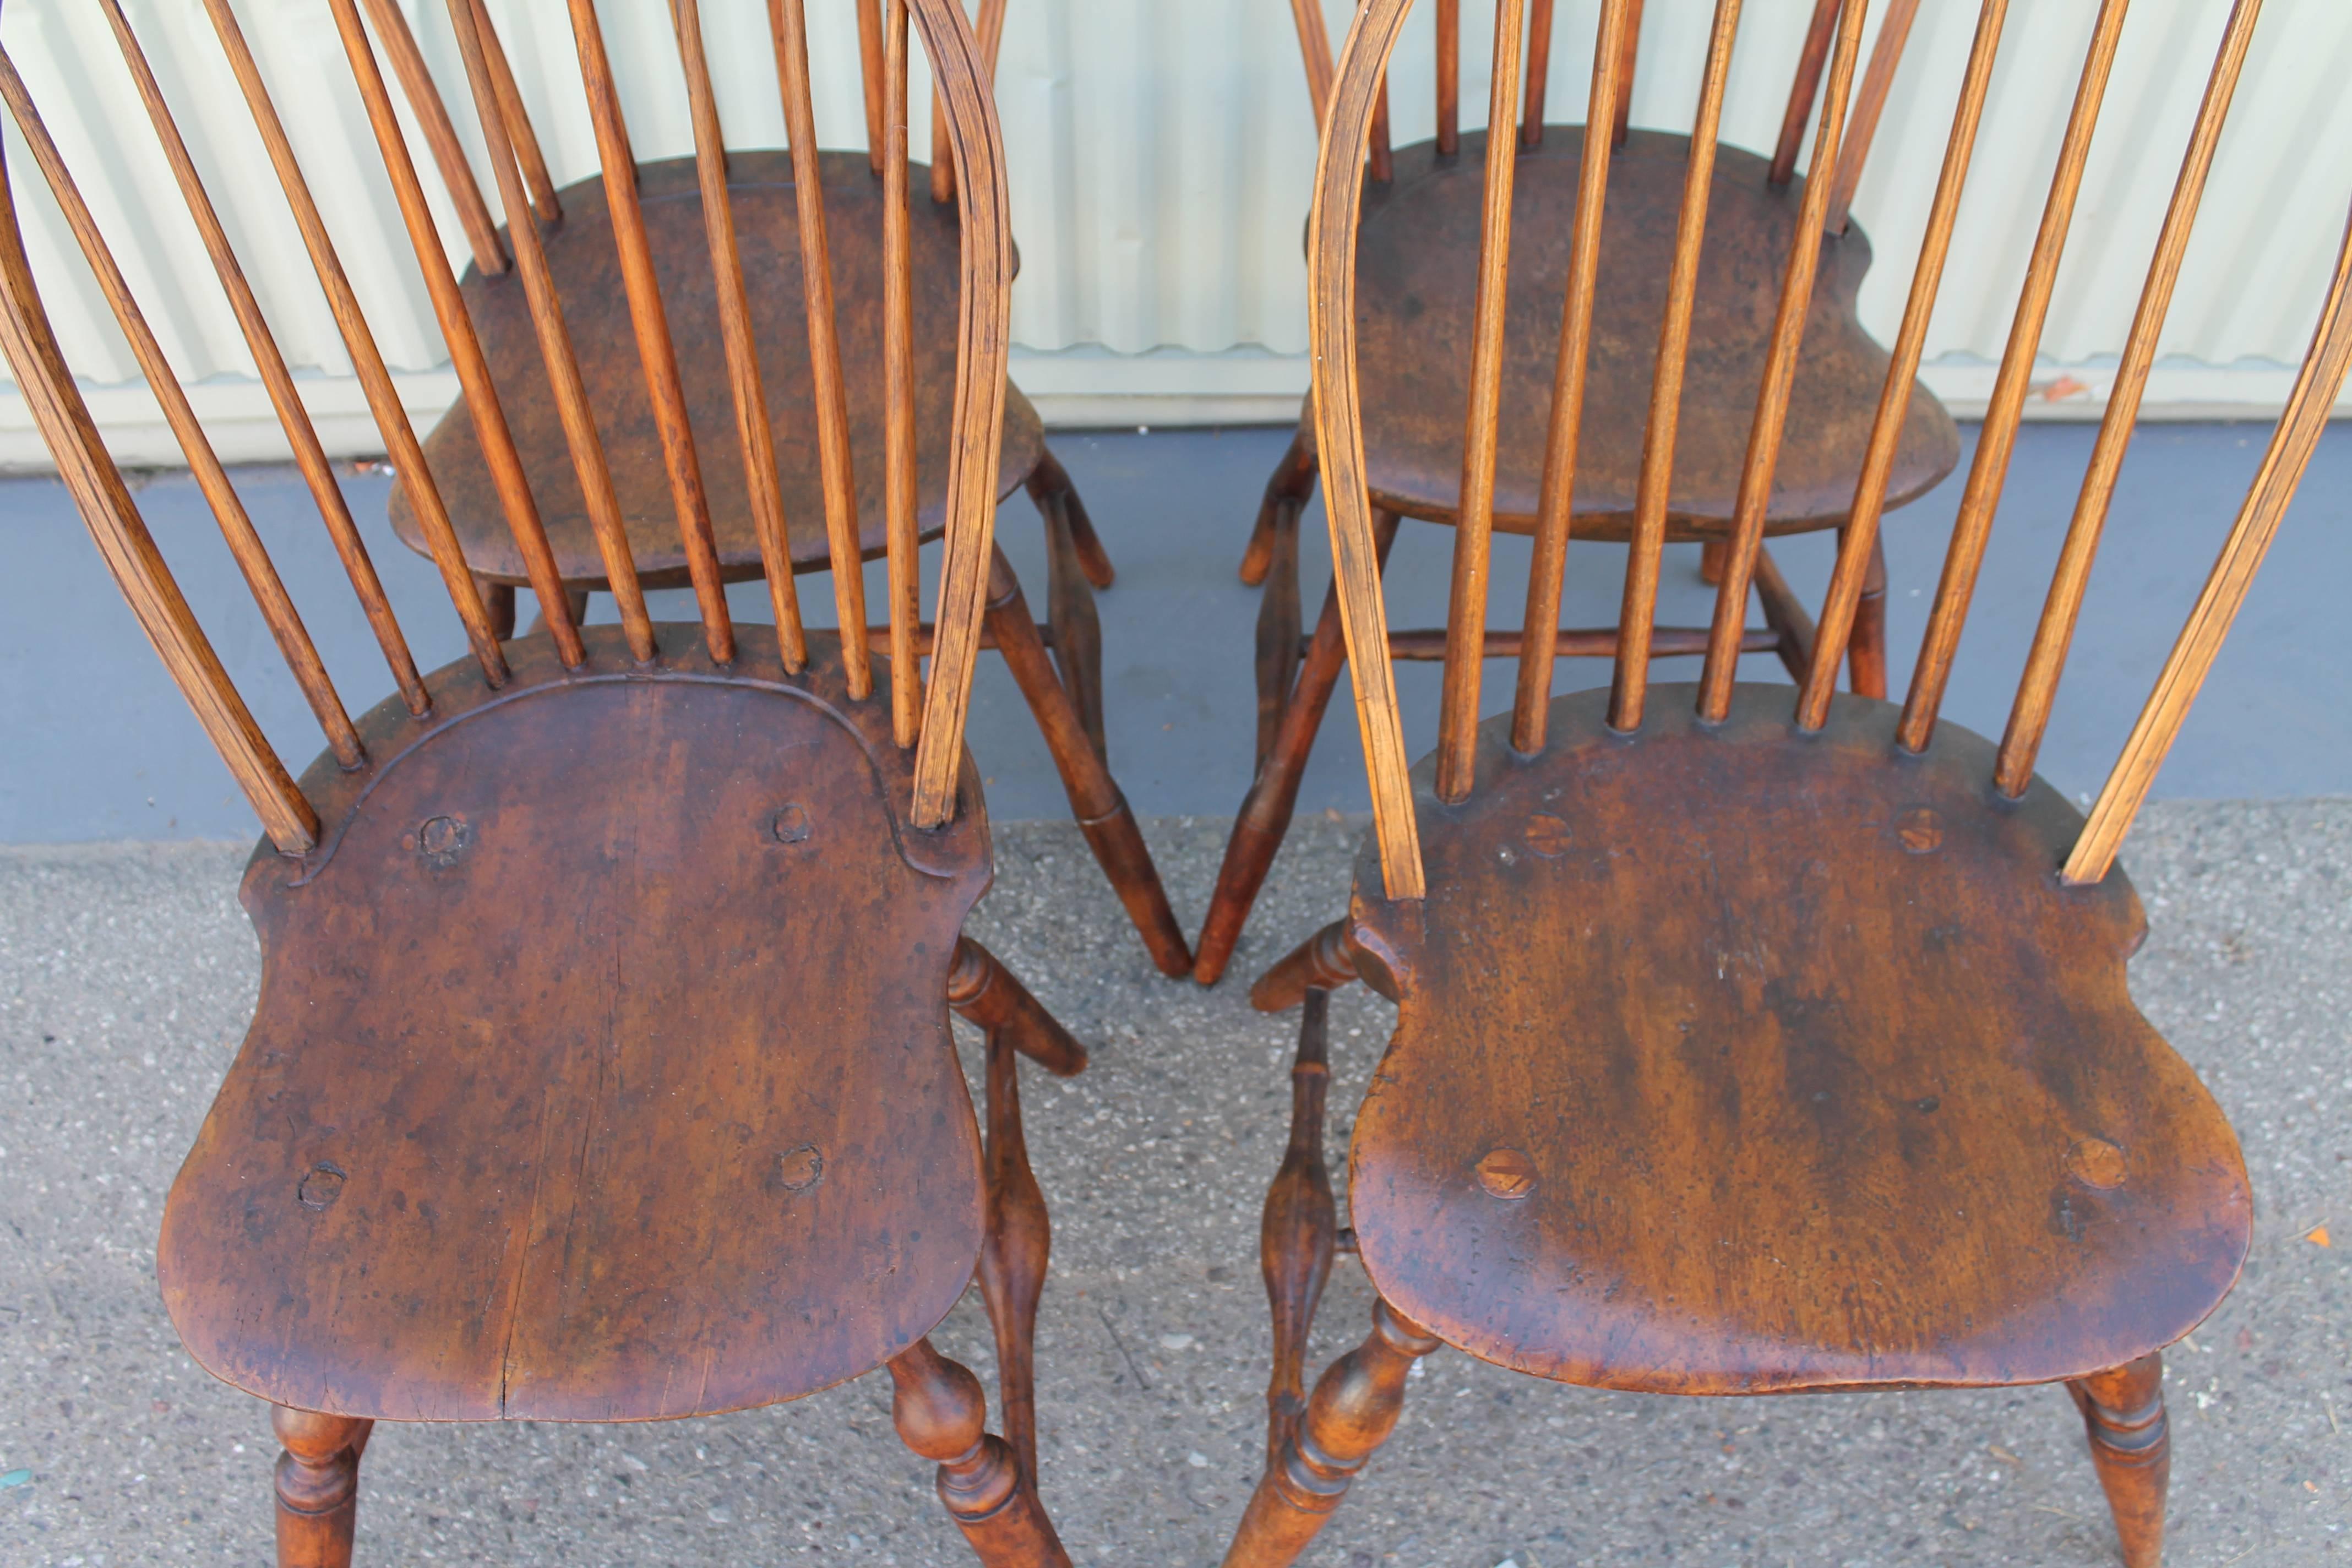 Hand-Crafted Set of Four Accumulated 19th Century Windsor Chairs